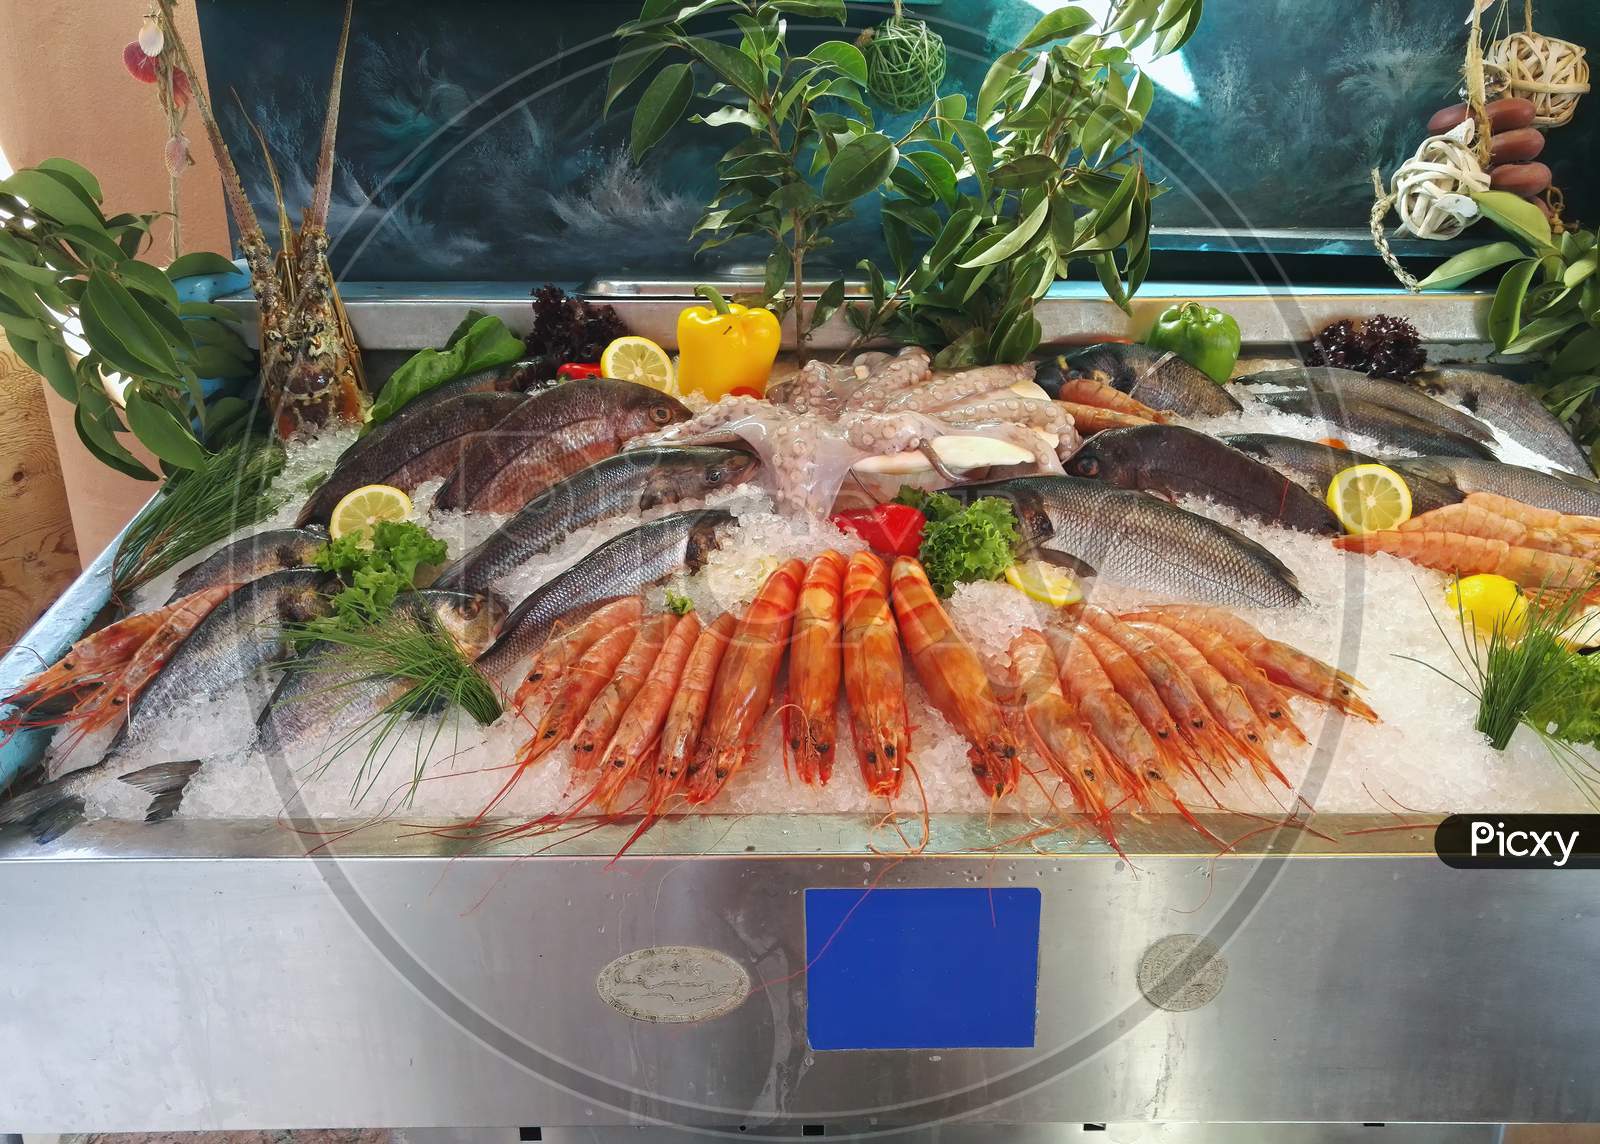 Still Life Of Fresh Fish In City Rethymno In Crete Greece. Seafood On Ice: Octobus, Snails, Crabs, Shrimp, Fish Etc, Europe